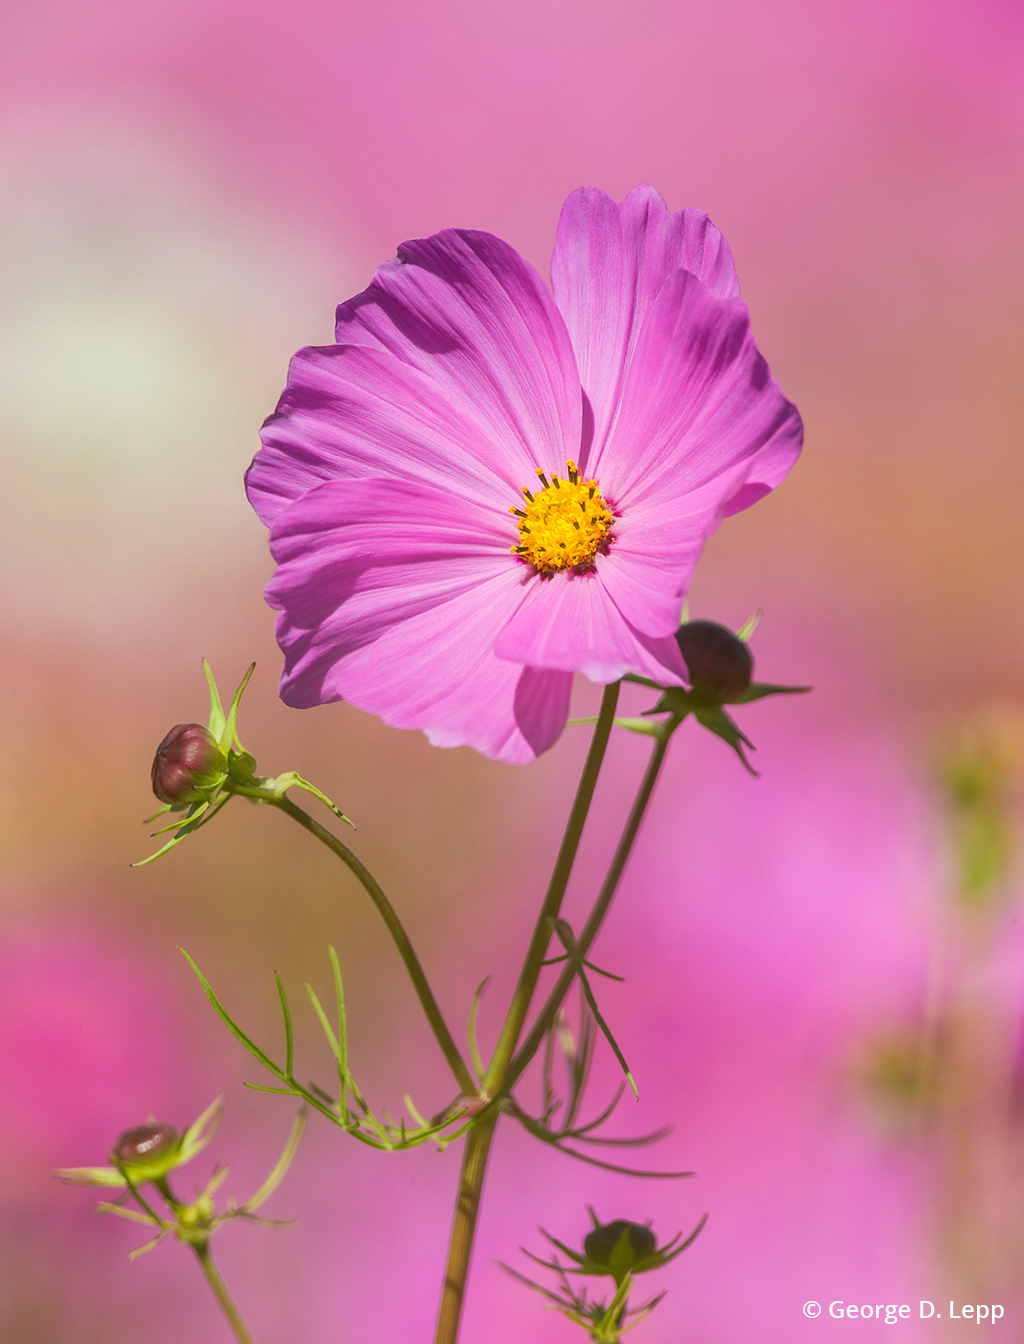 Photo of cosmos flower taken with a telephoto lens